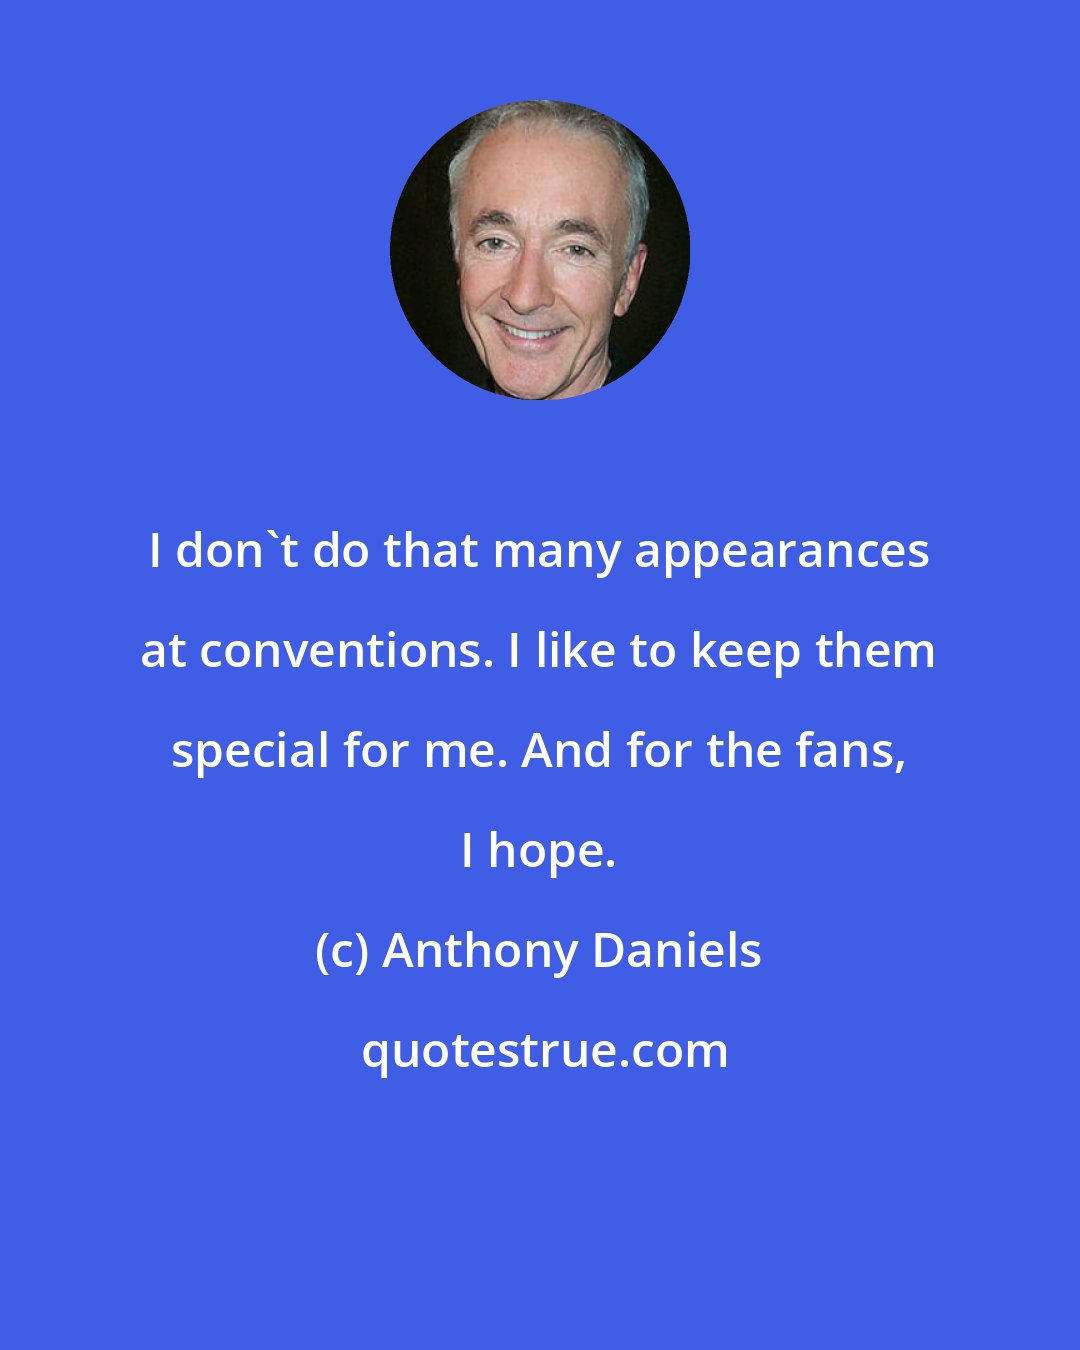 Anthony Daniels: I don't do that many appearances at conventions. I like to keep them special for me. And for the fans, I hope.